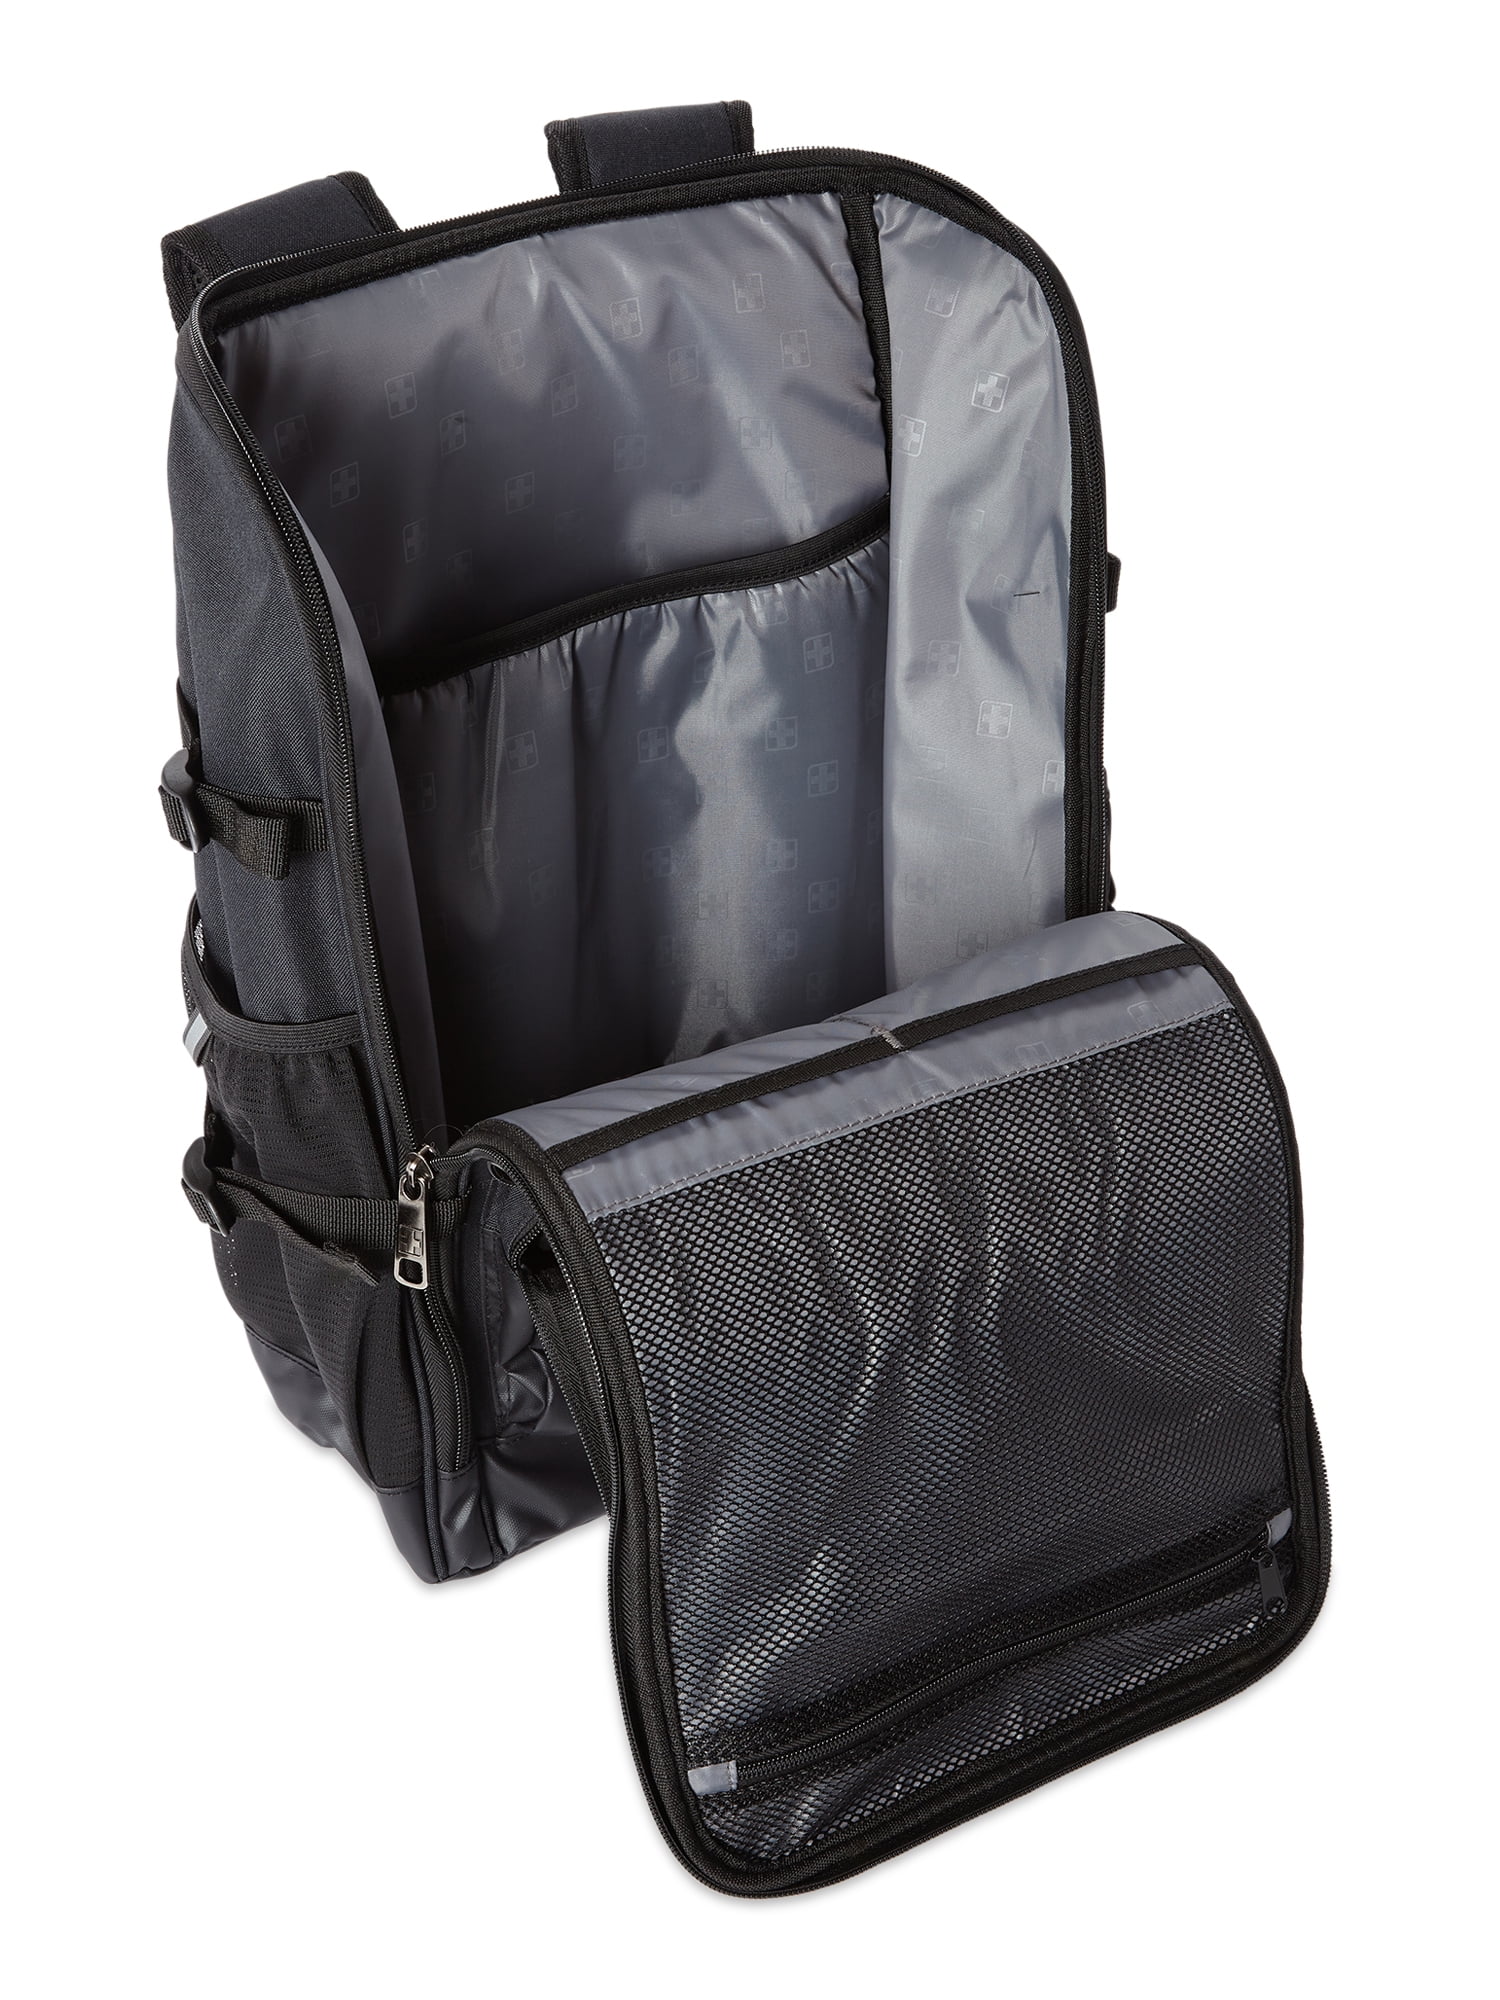 SwissTech Travel Sling Backpack, Black (All Ages) (Walmart Exclusive) 